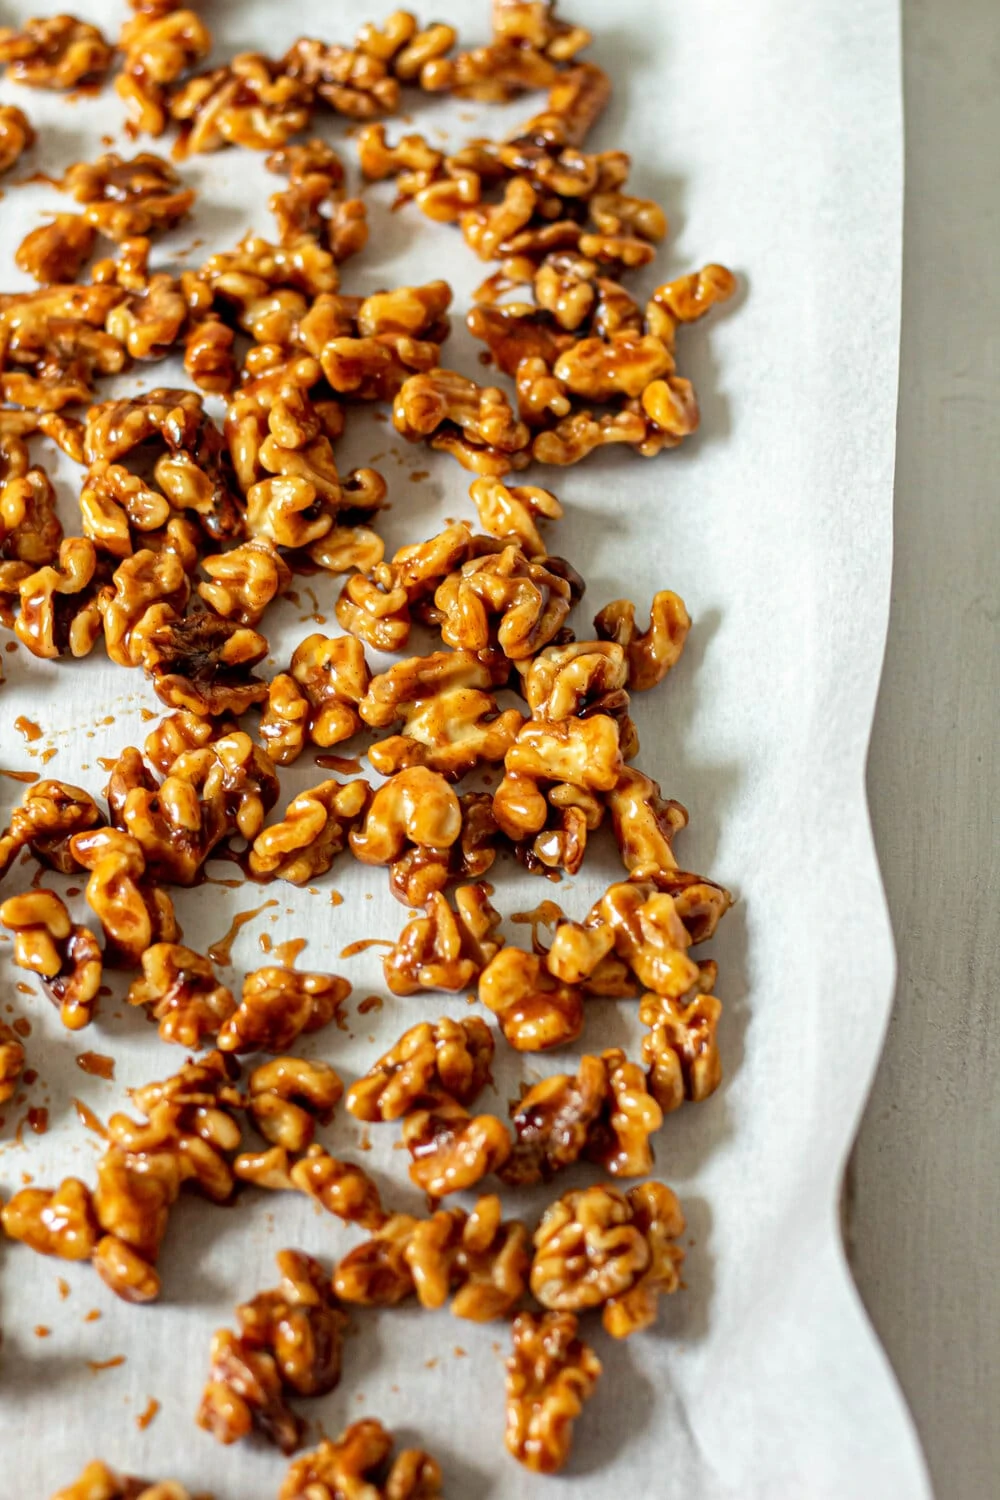 Honey Glazed Walnuts on a sheet pan lined with parchment paper